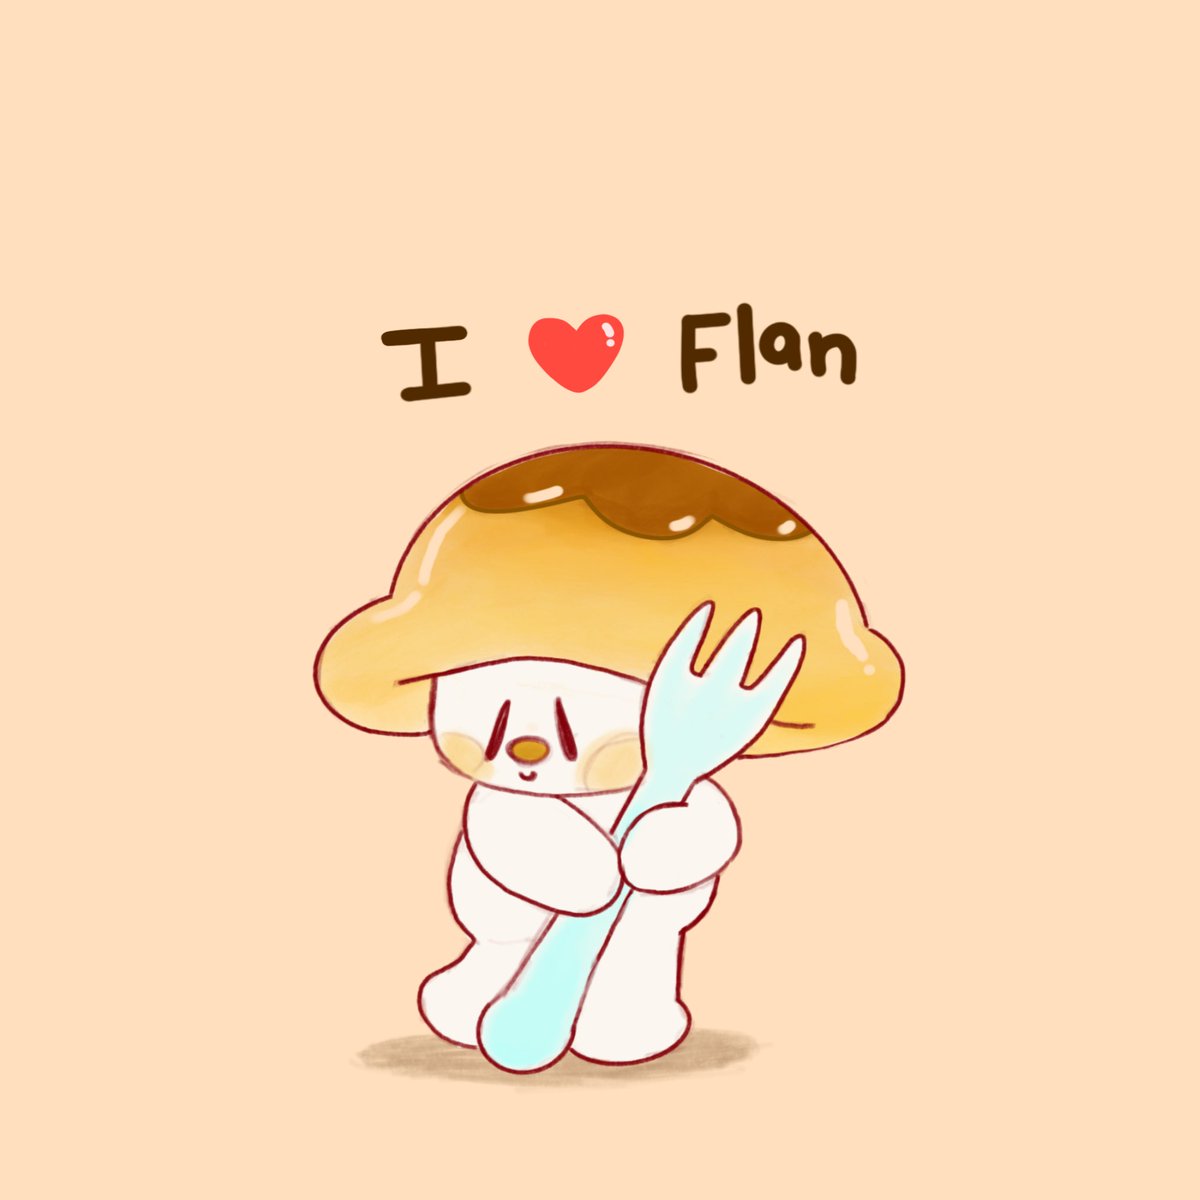 flan will forever be superior 🍮